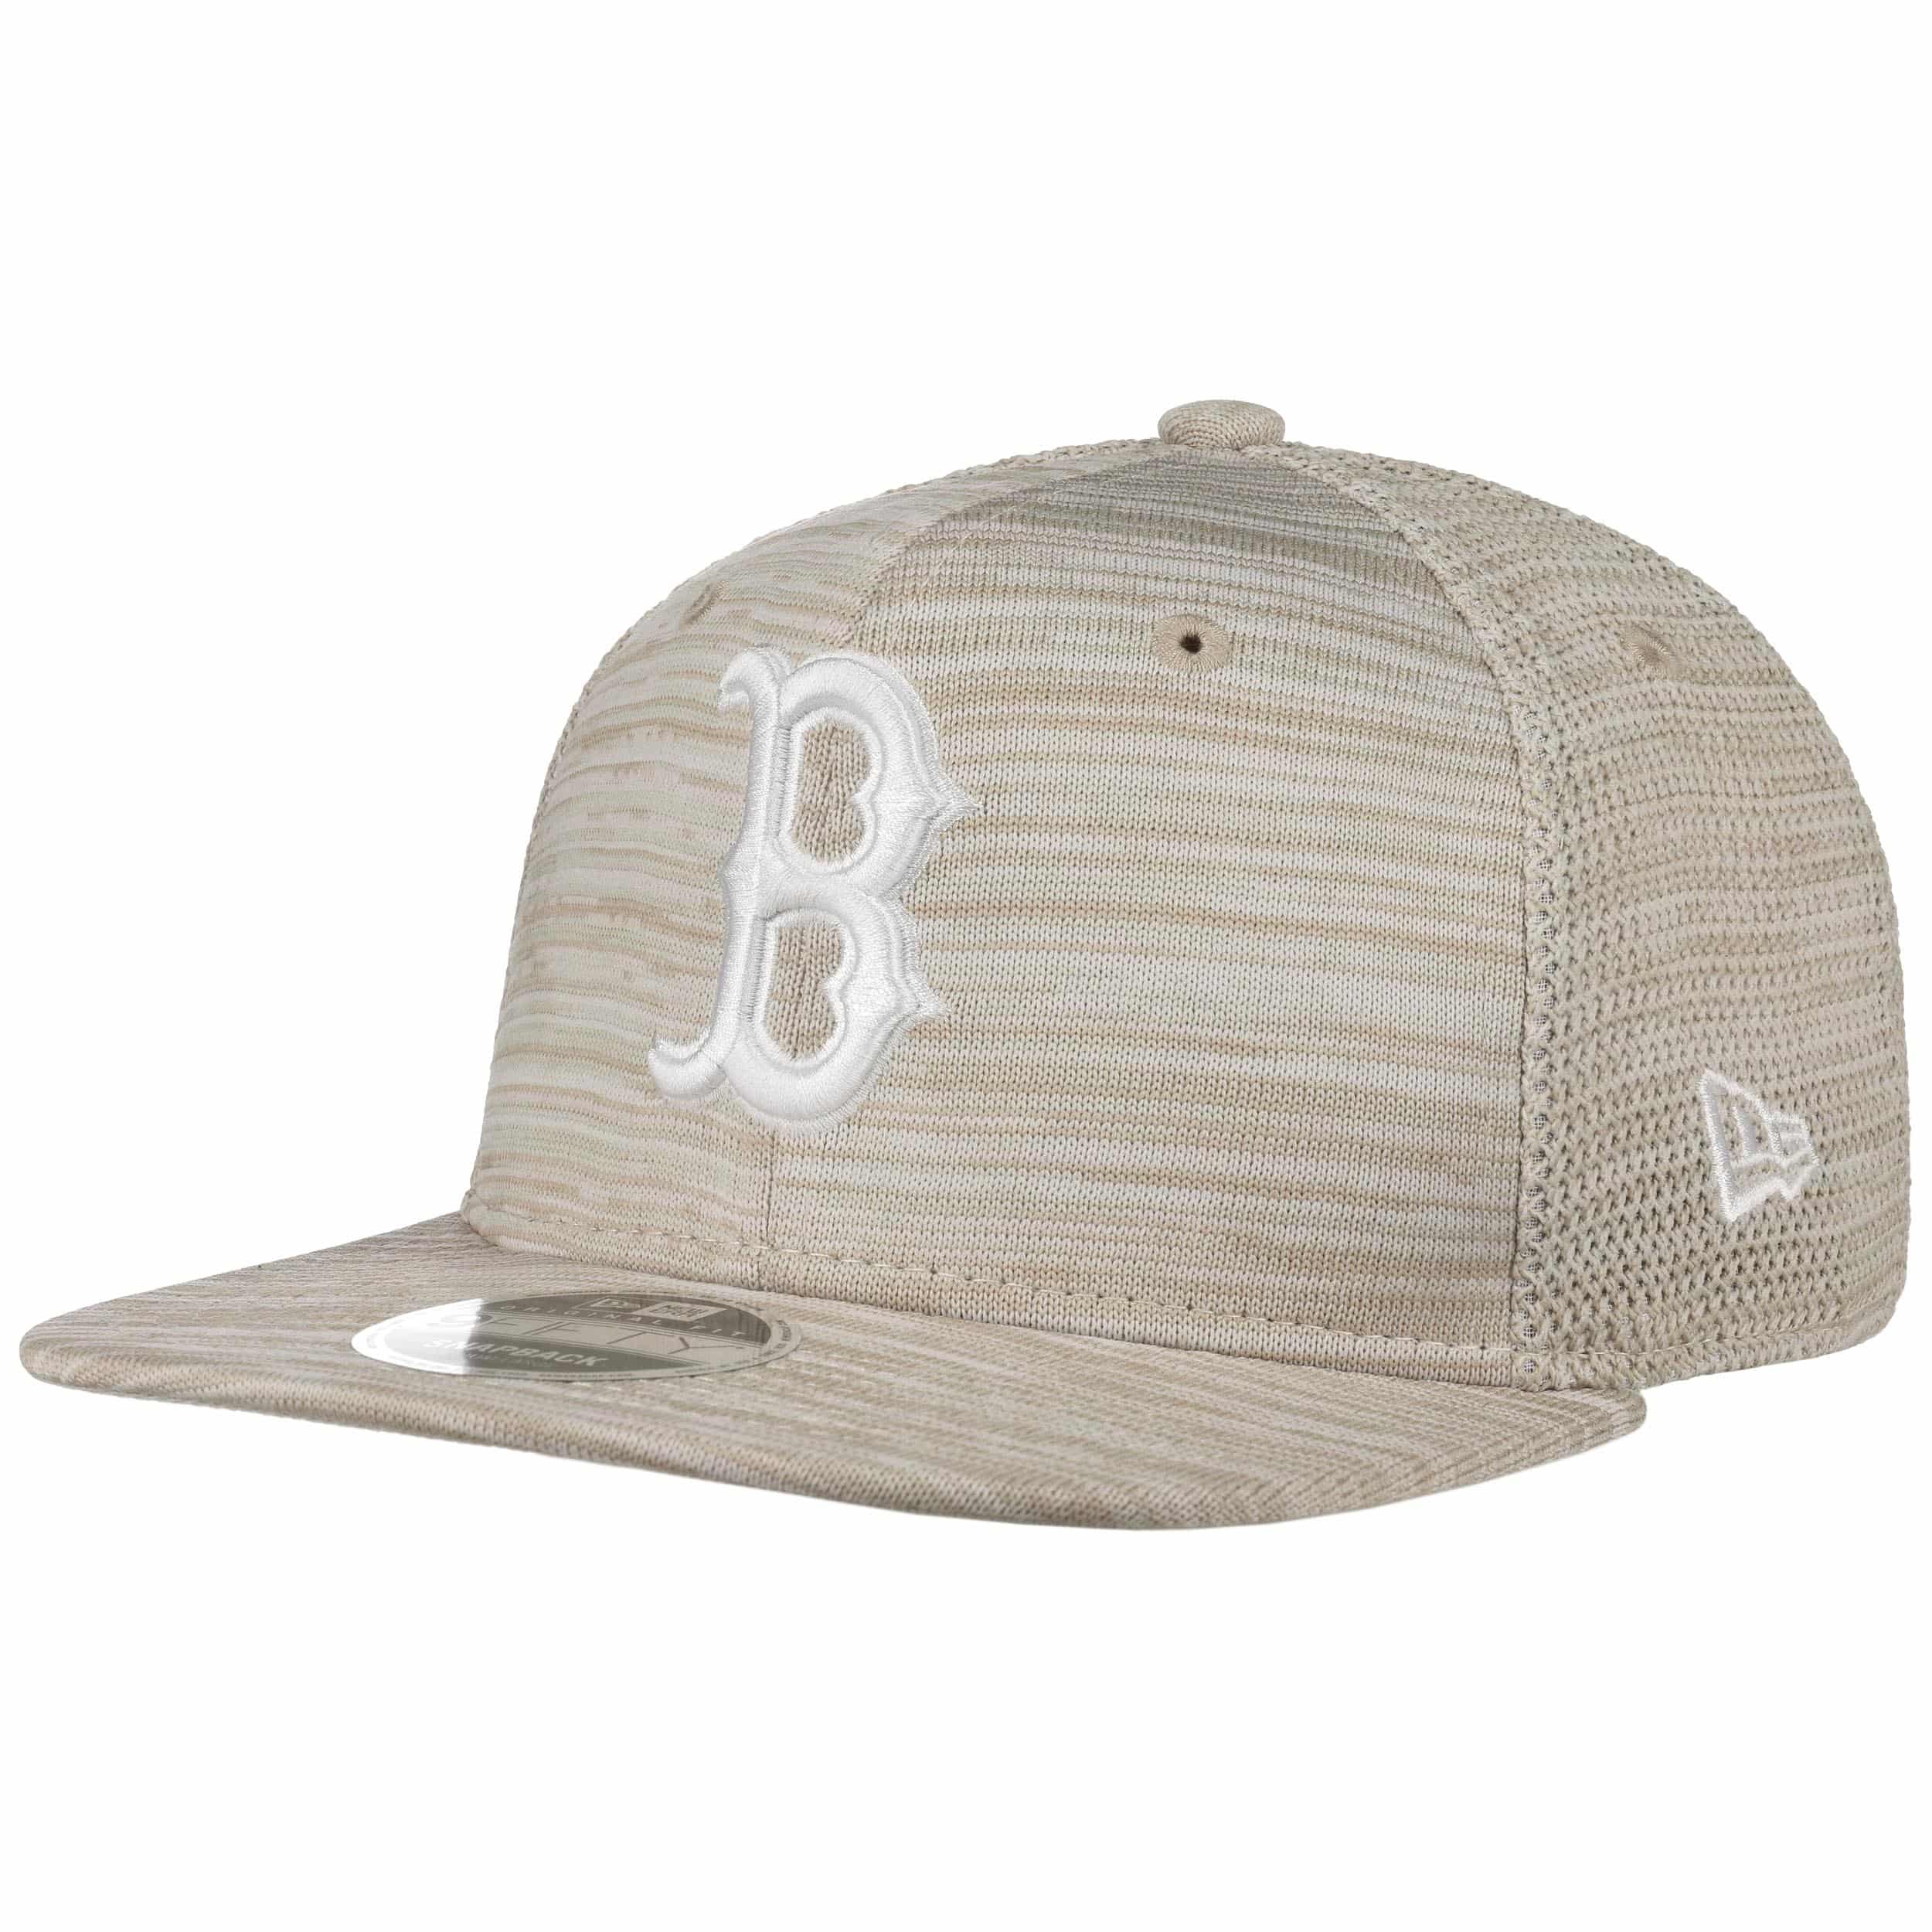 New Era 9FORTY ENGINEERED BOSTON RED SOX